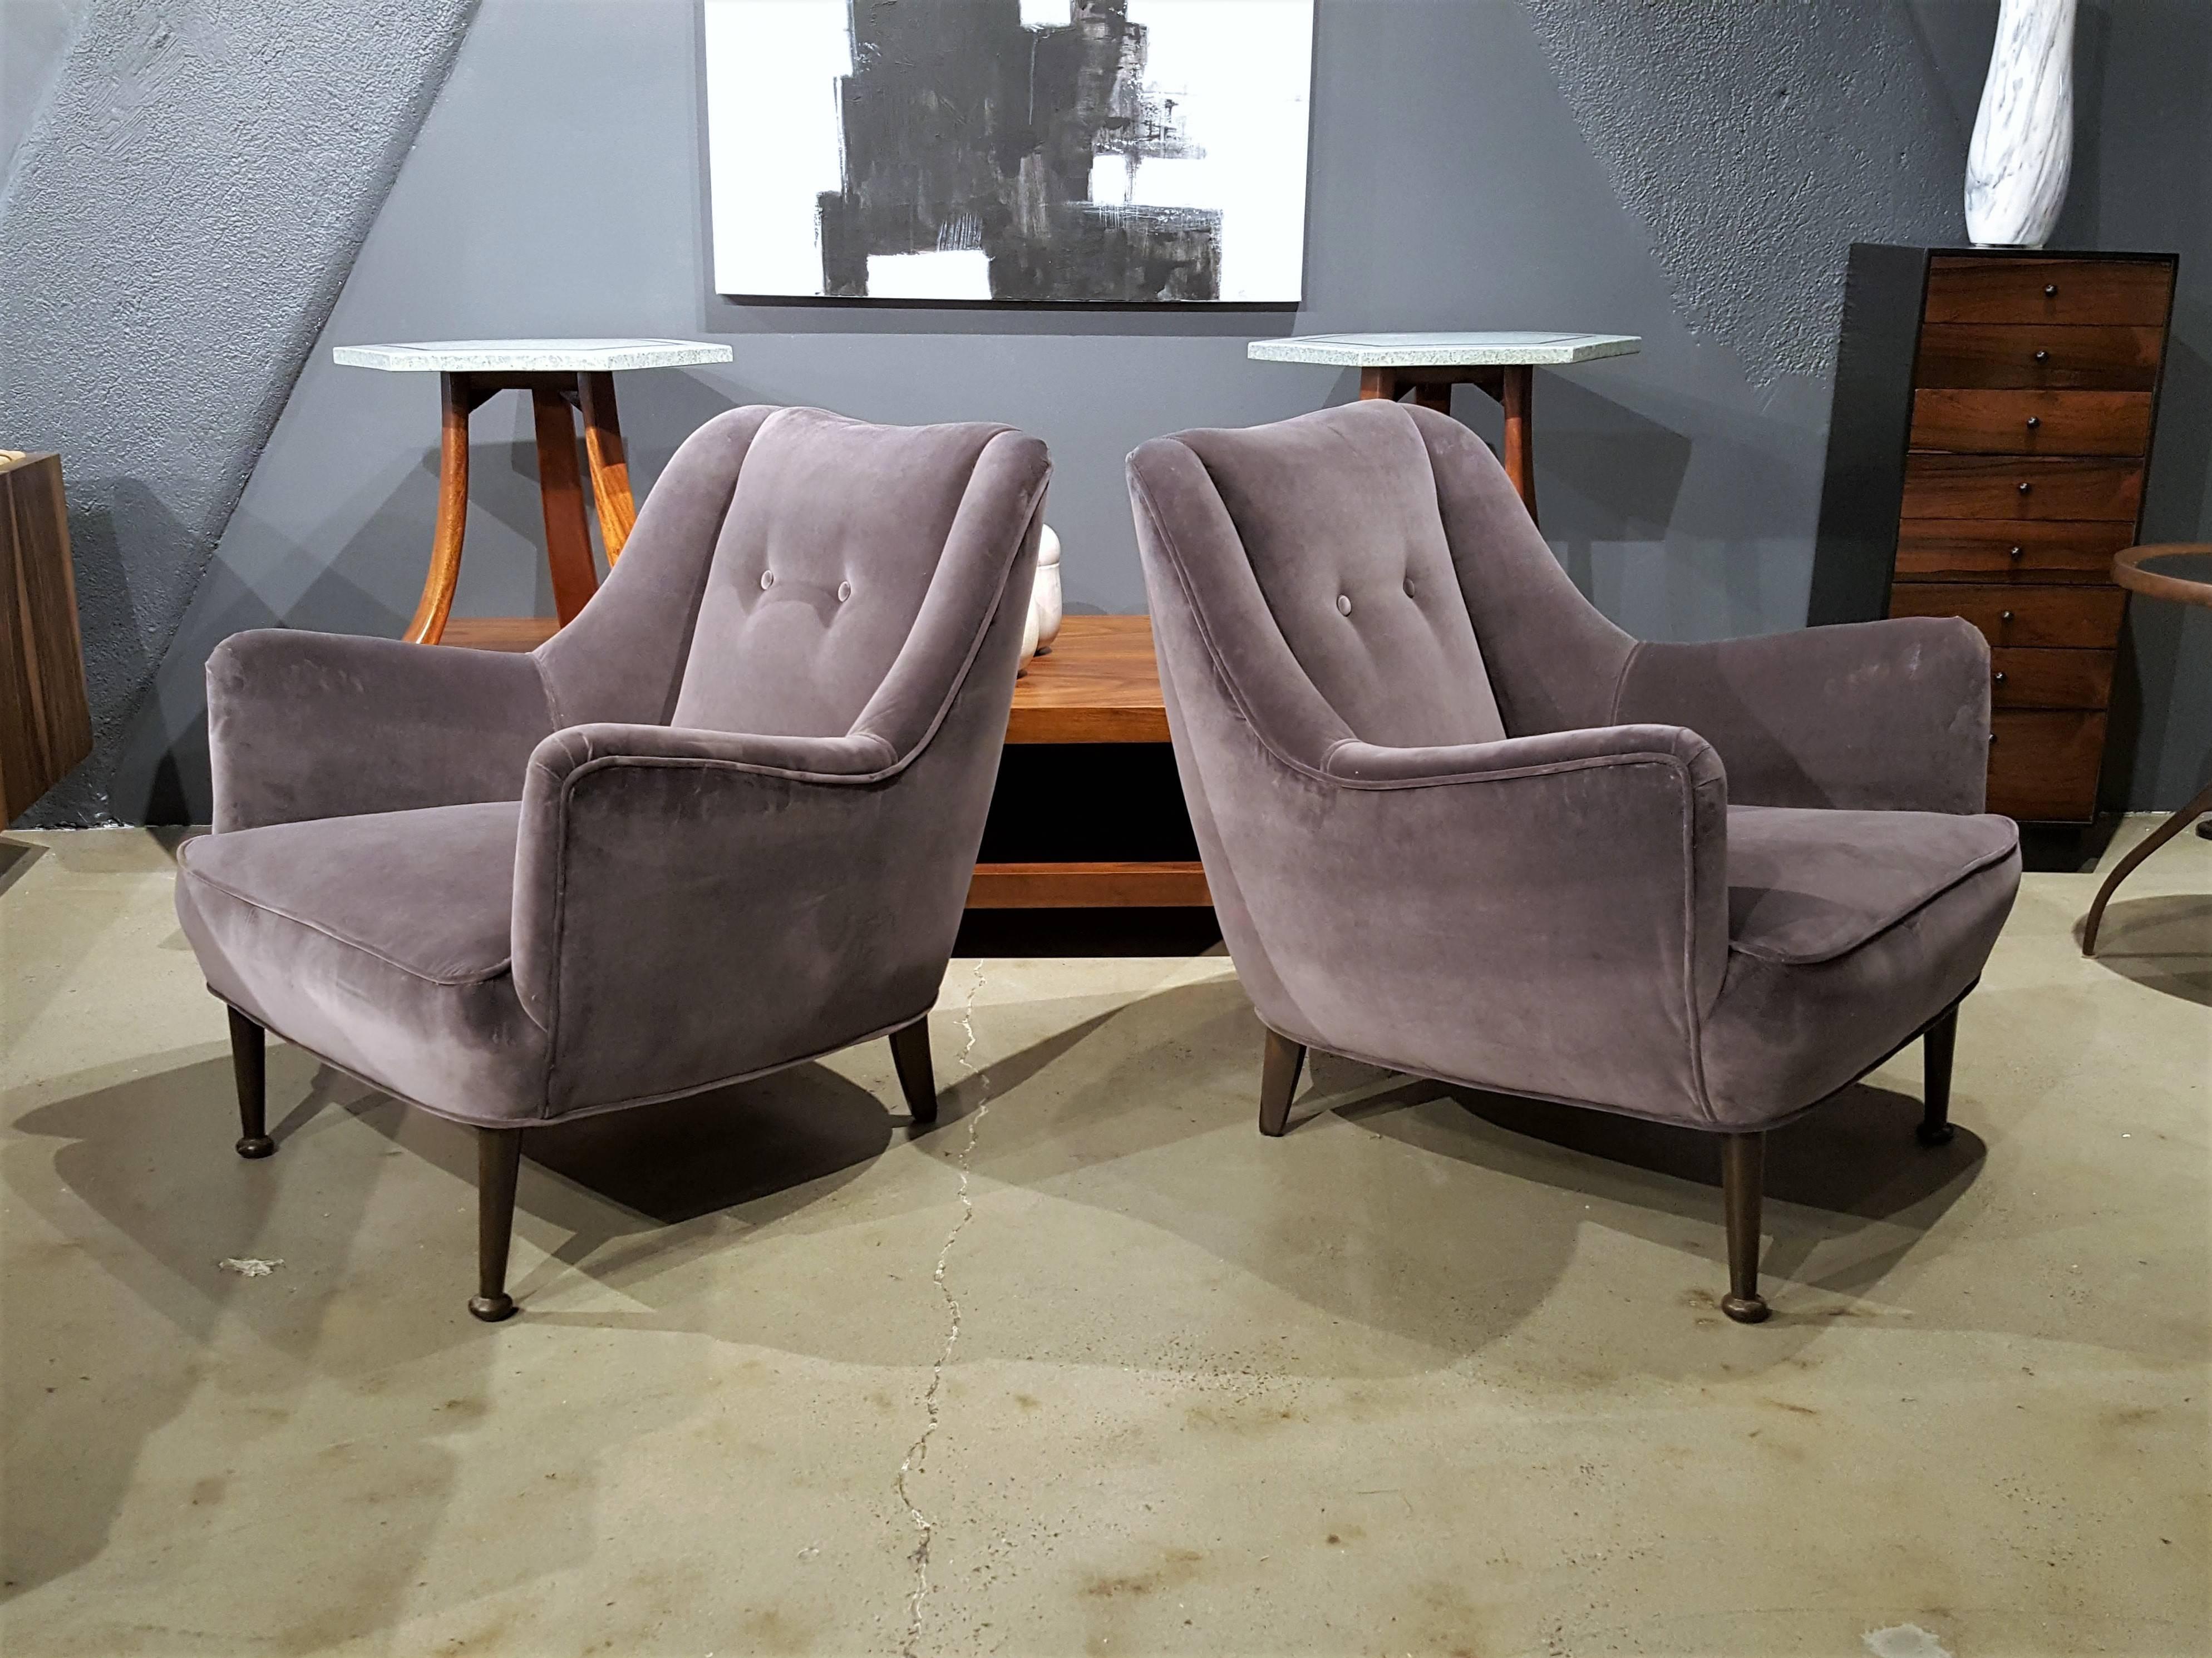 Turned Luxe Pair of Mid-Century Modern Lounge Chairs in Deep Lilac Gray Velvet